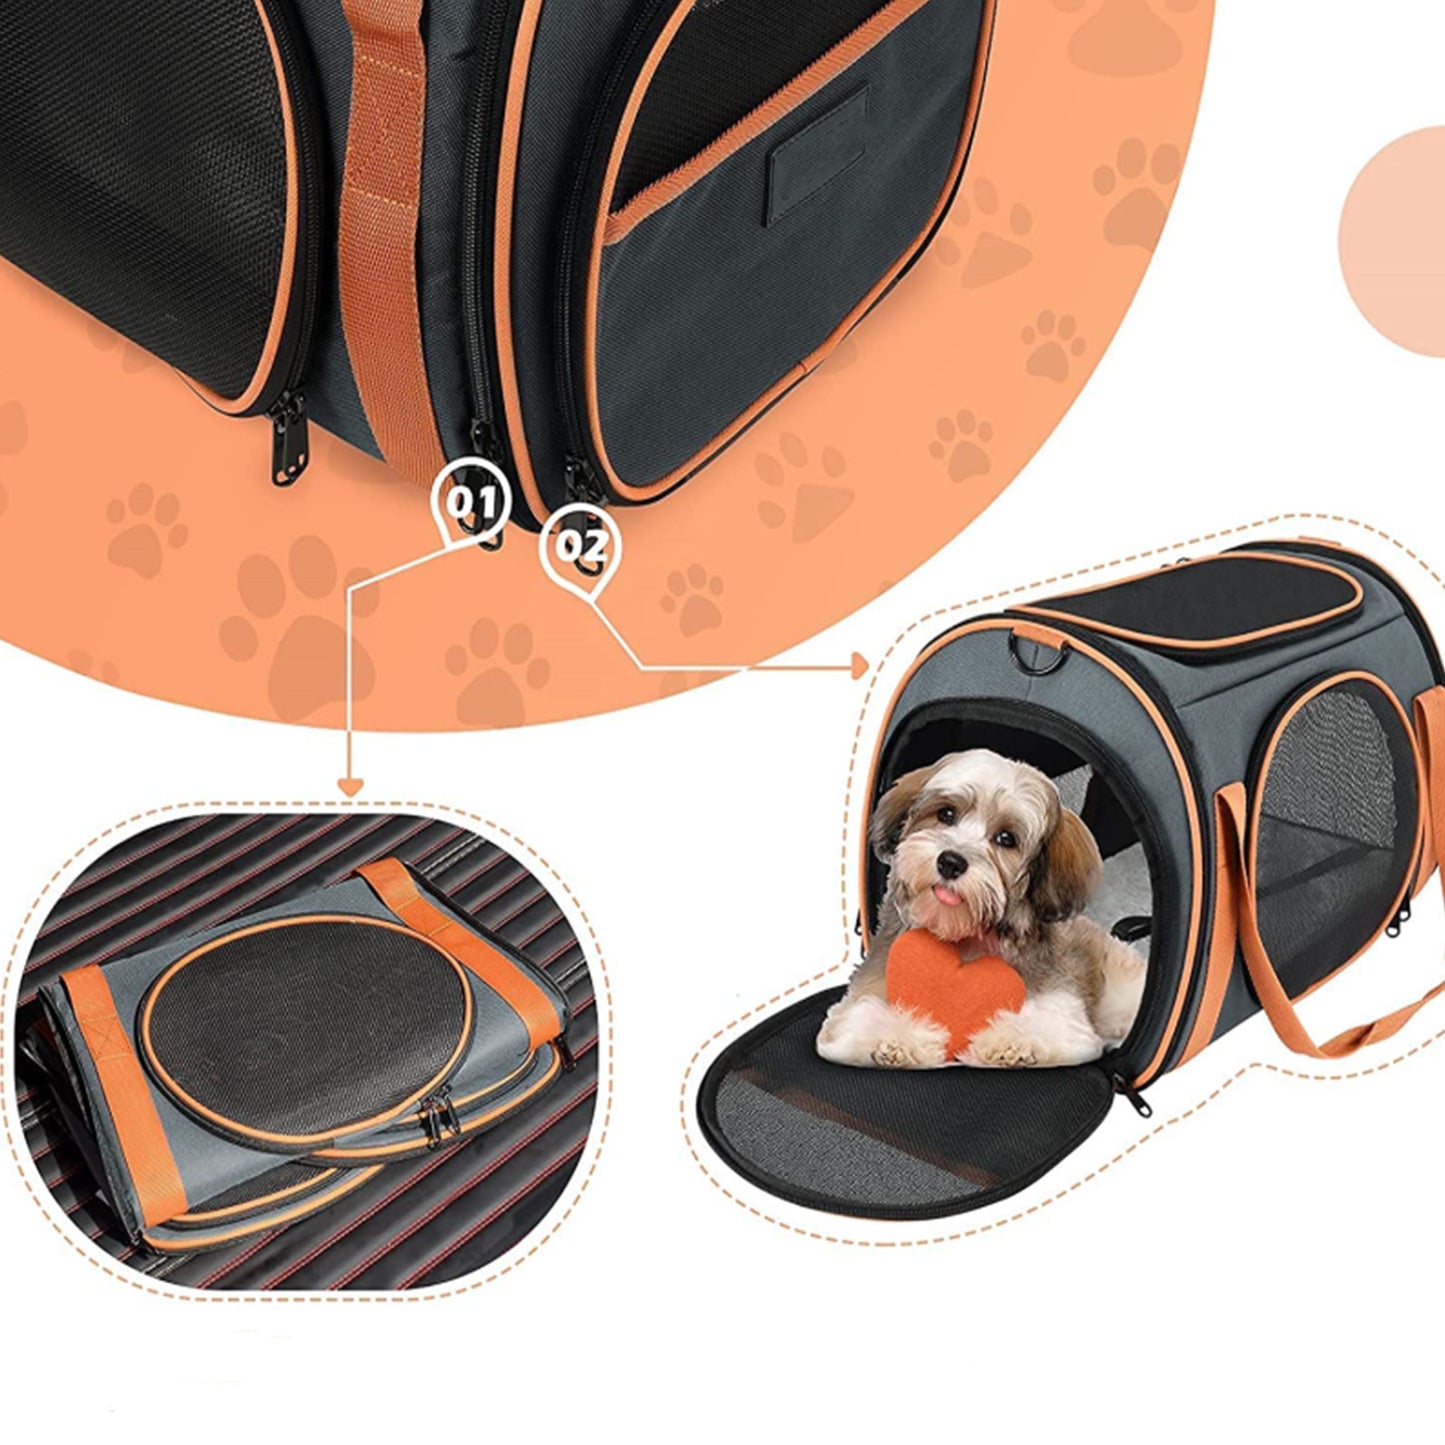 Cat Dog Carrier Dog With Big Space - TSA Airline Approved With Ventilation 5 Mesh Windows 4 Open Doors